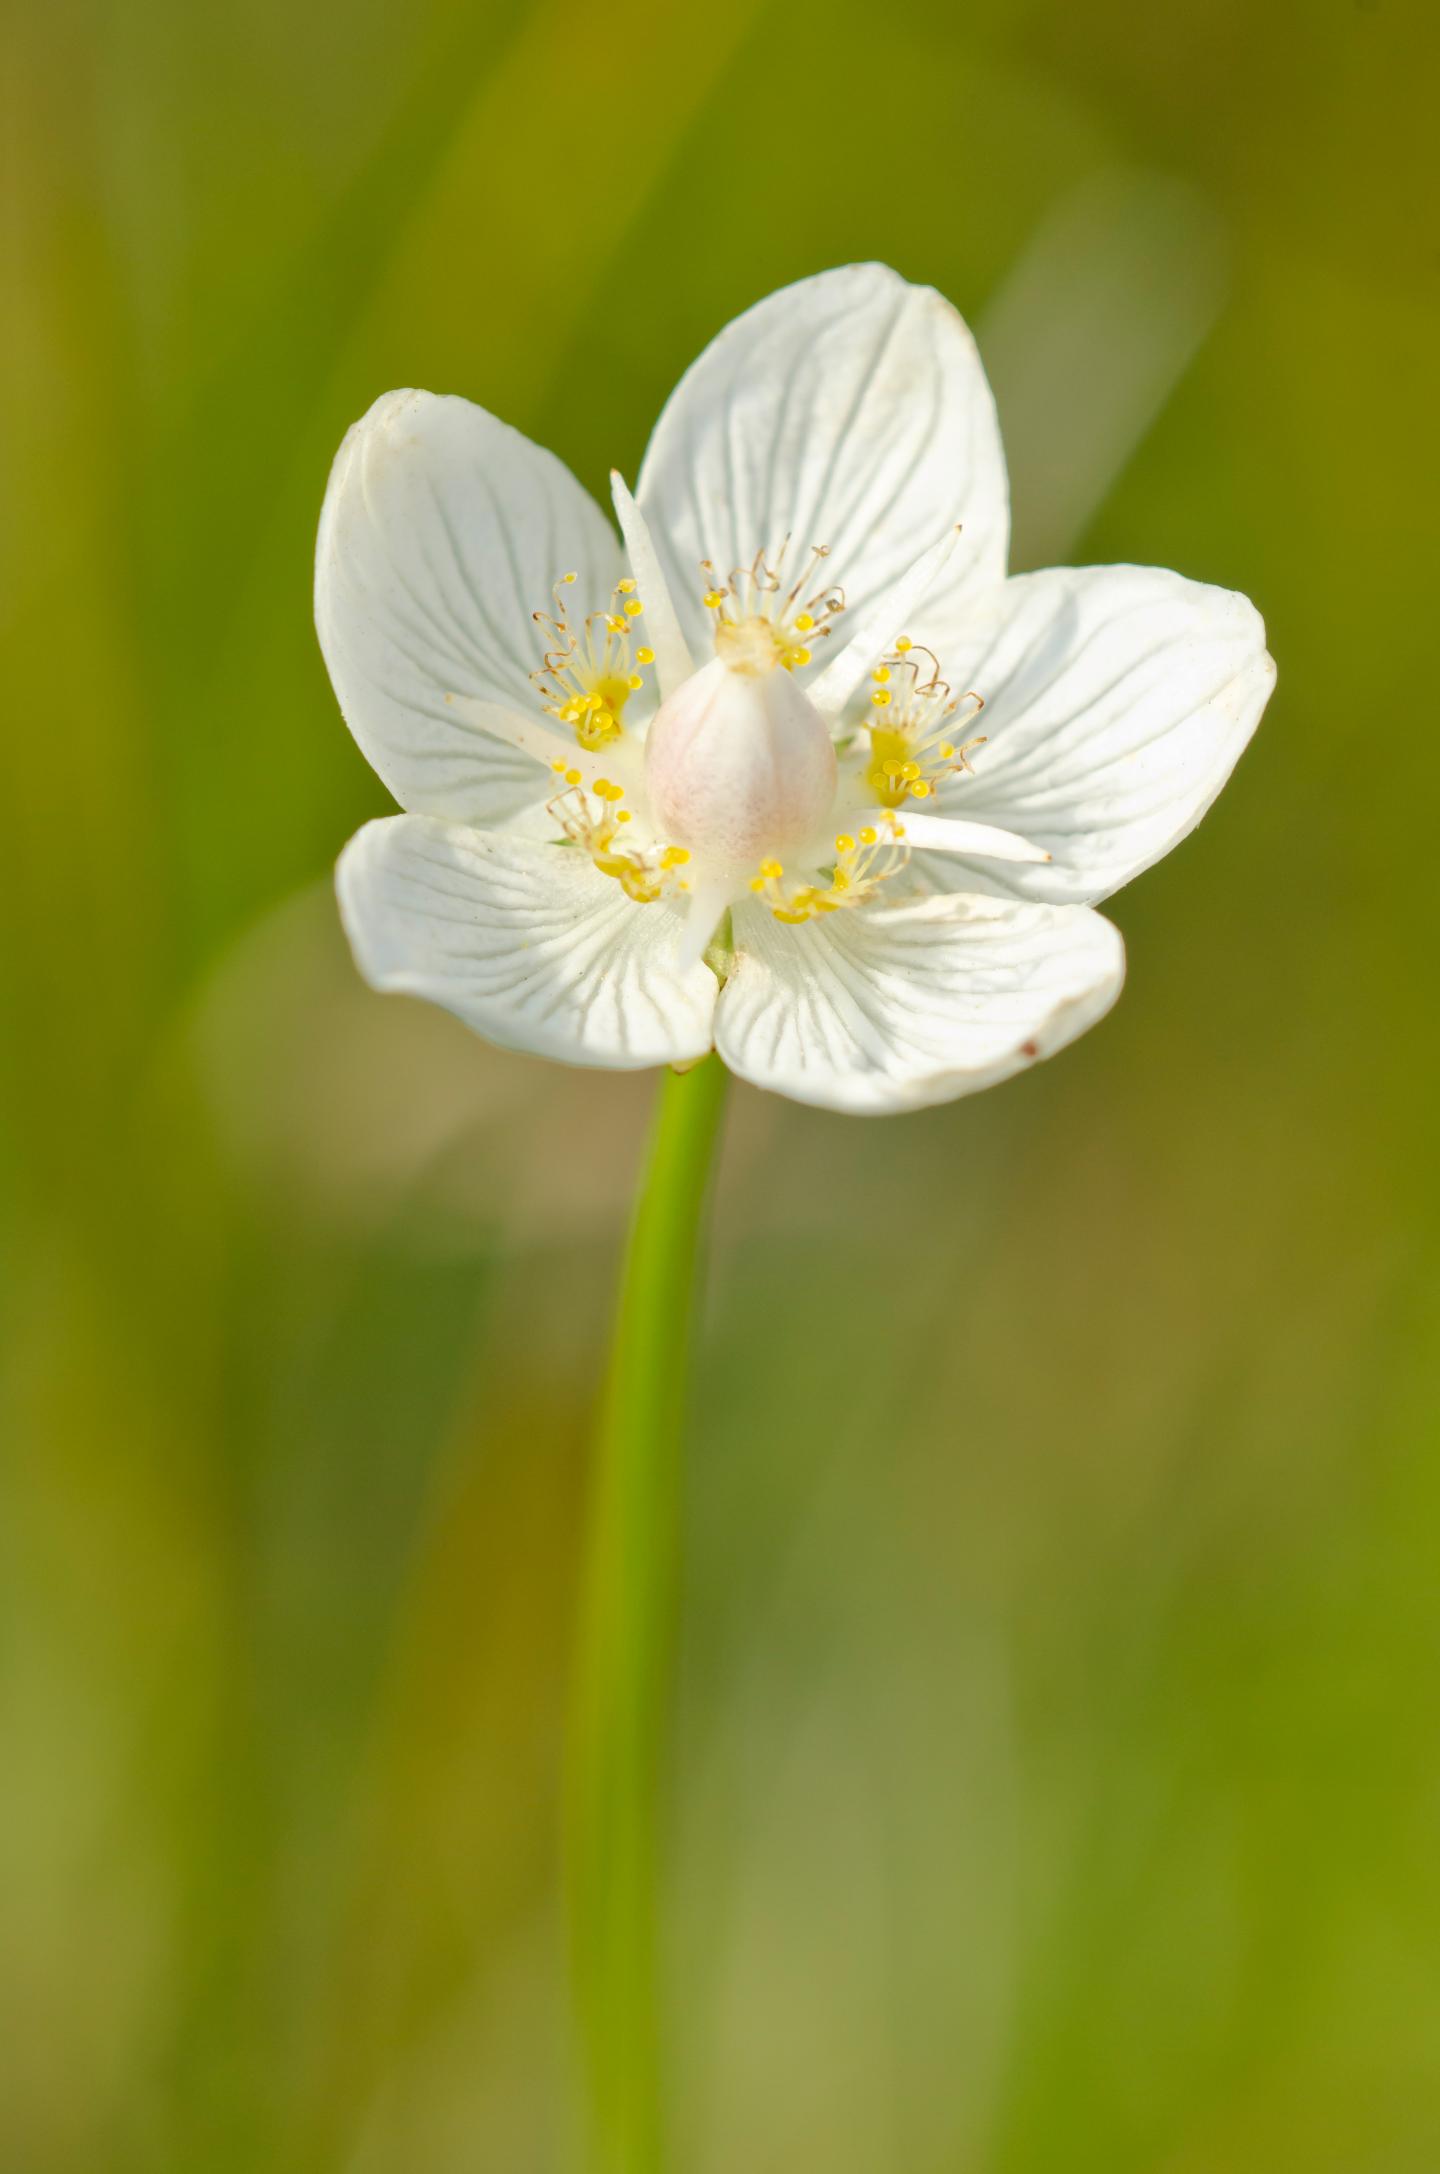 White Flower With Five Petals On Green Background